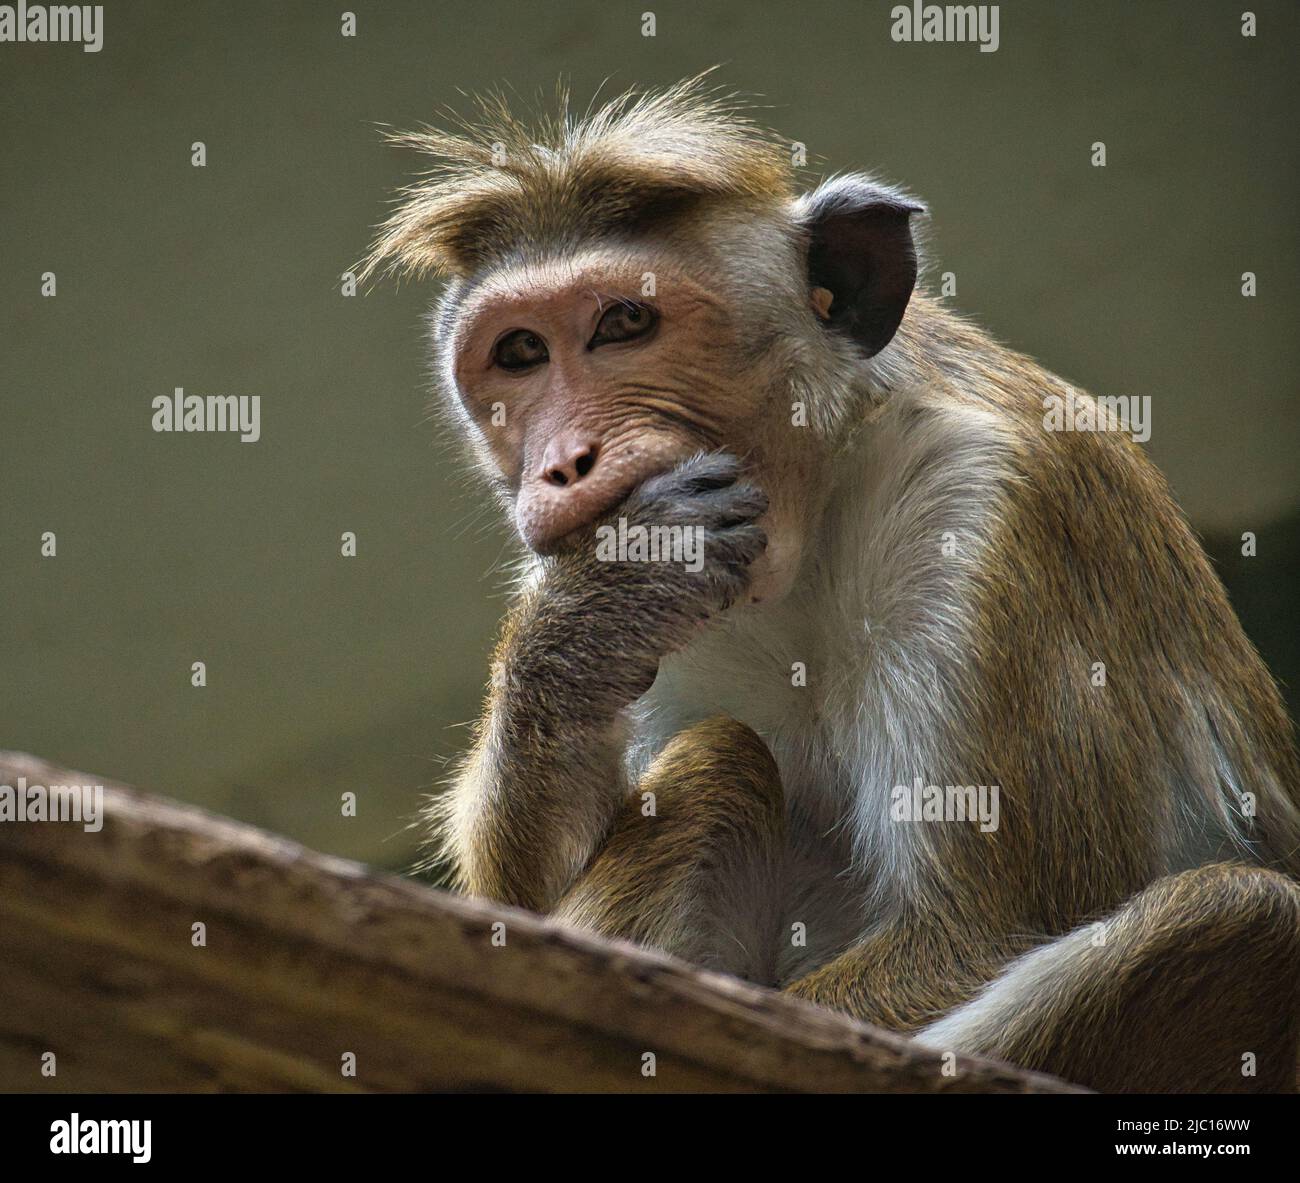 Rhesus monkey sitting on a branch and nibbling his hand. animal photo of a mammal Stock Photo